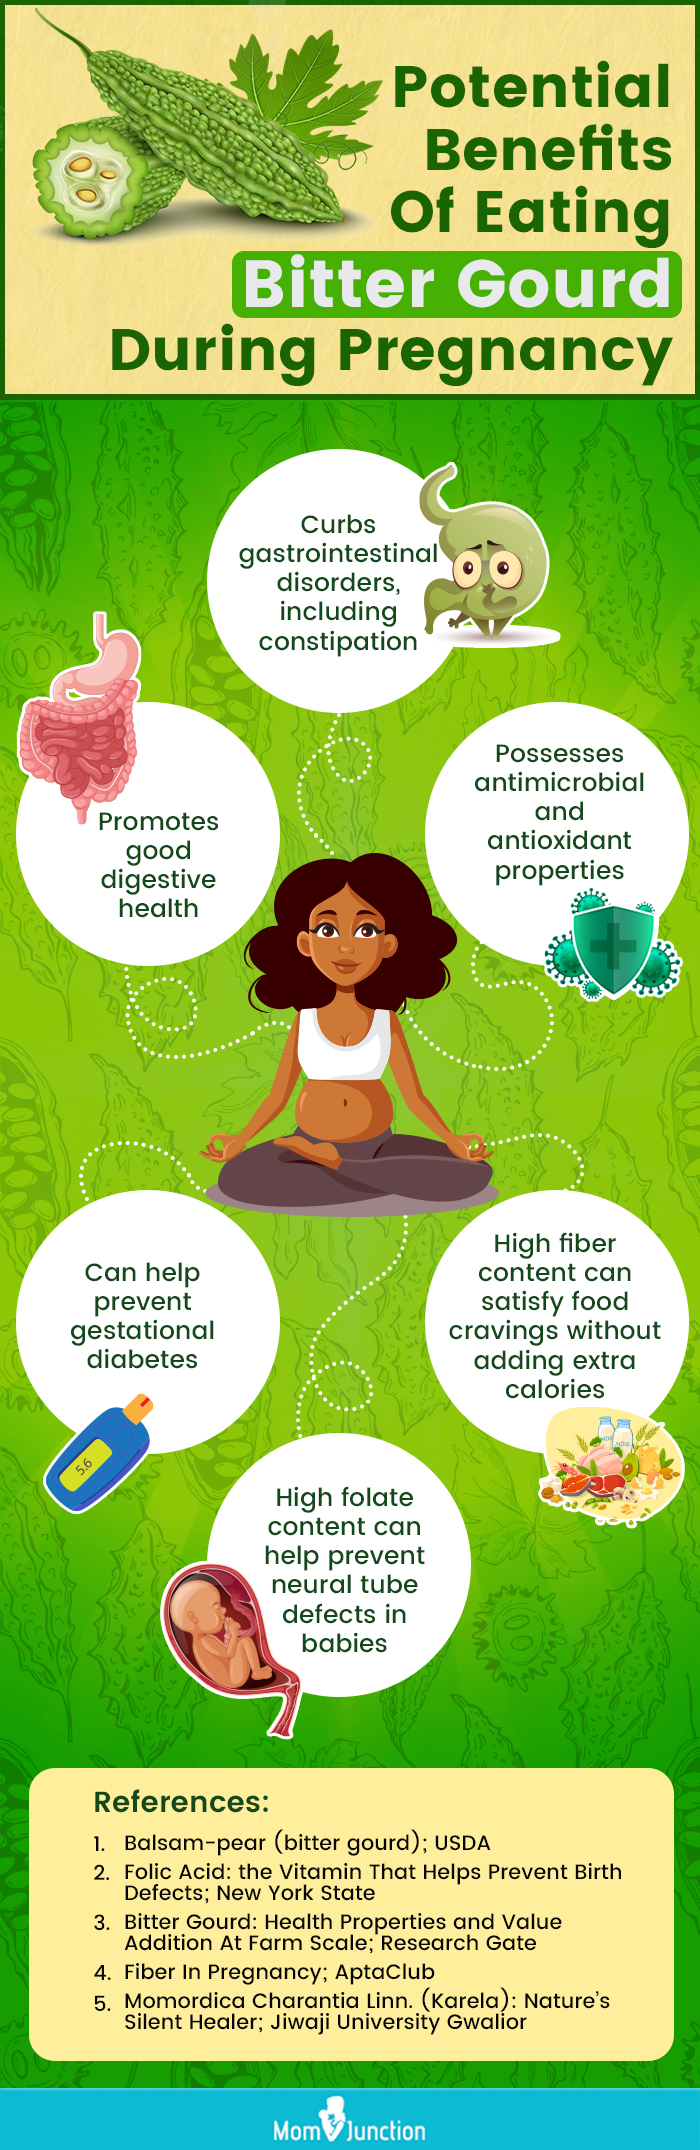 potential benefits of eating bitter gourd during pregnancy [infographic]